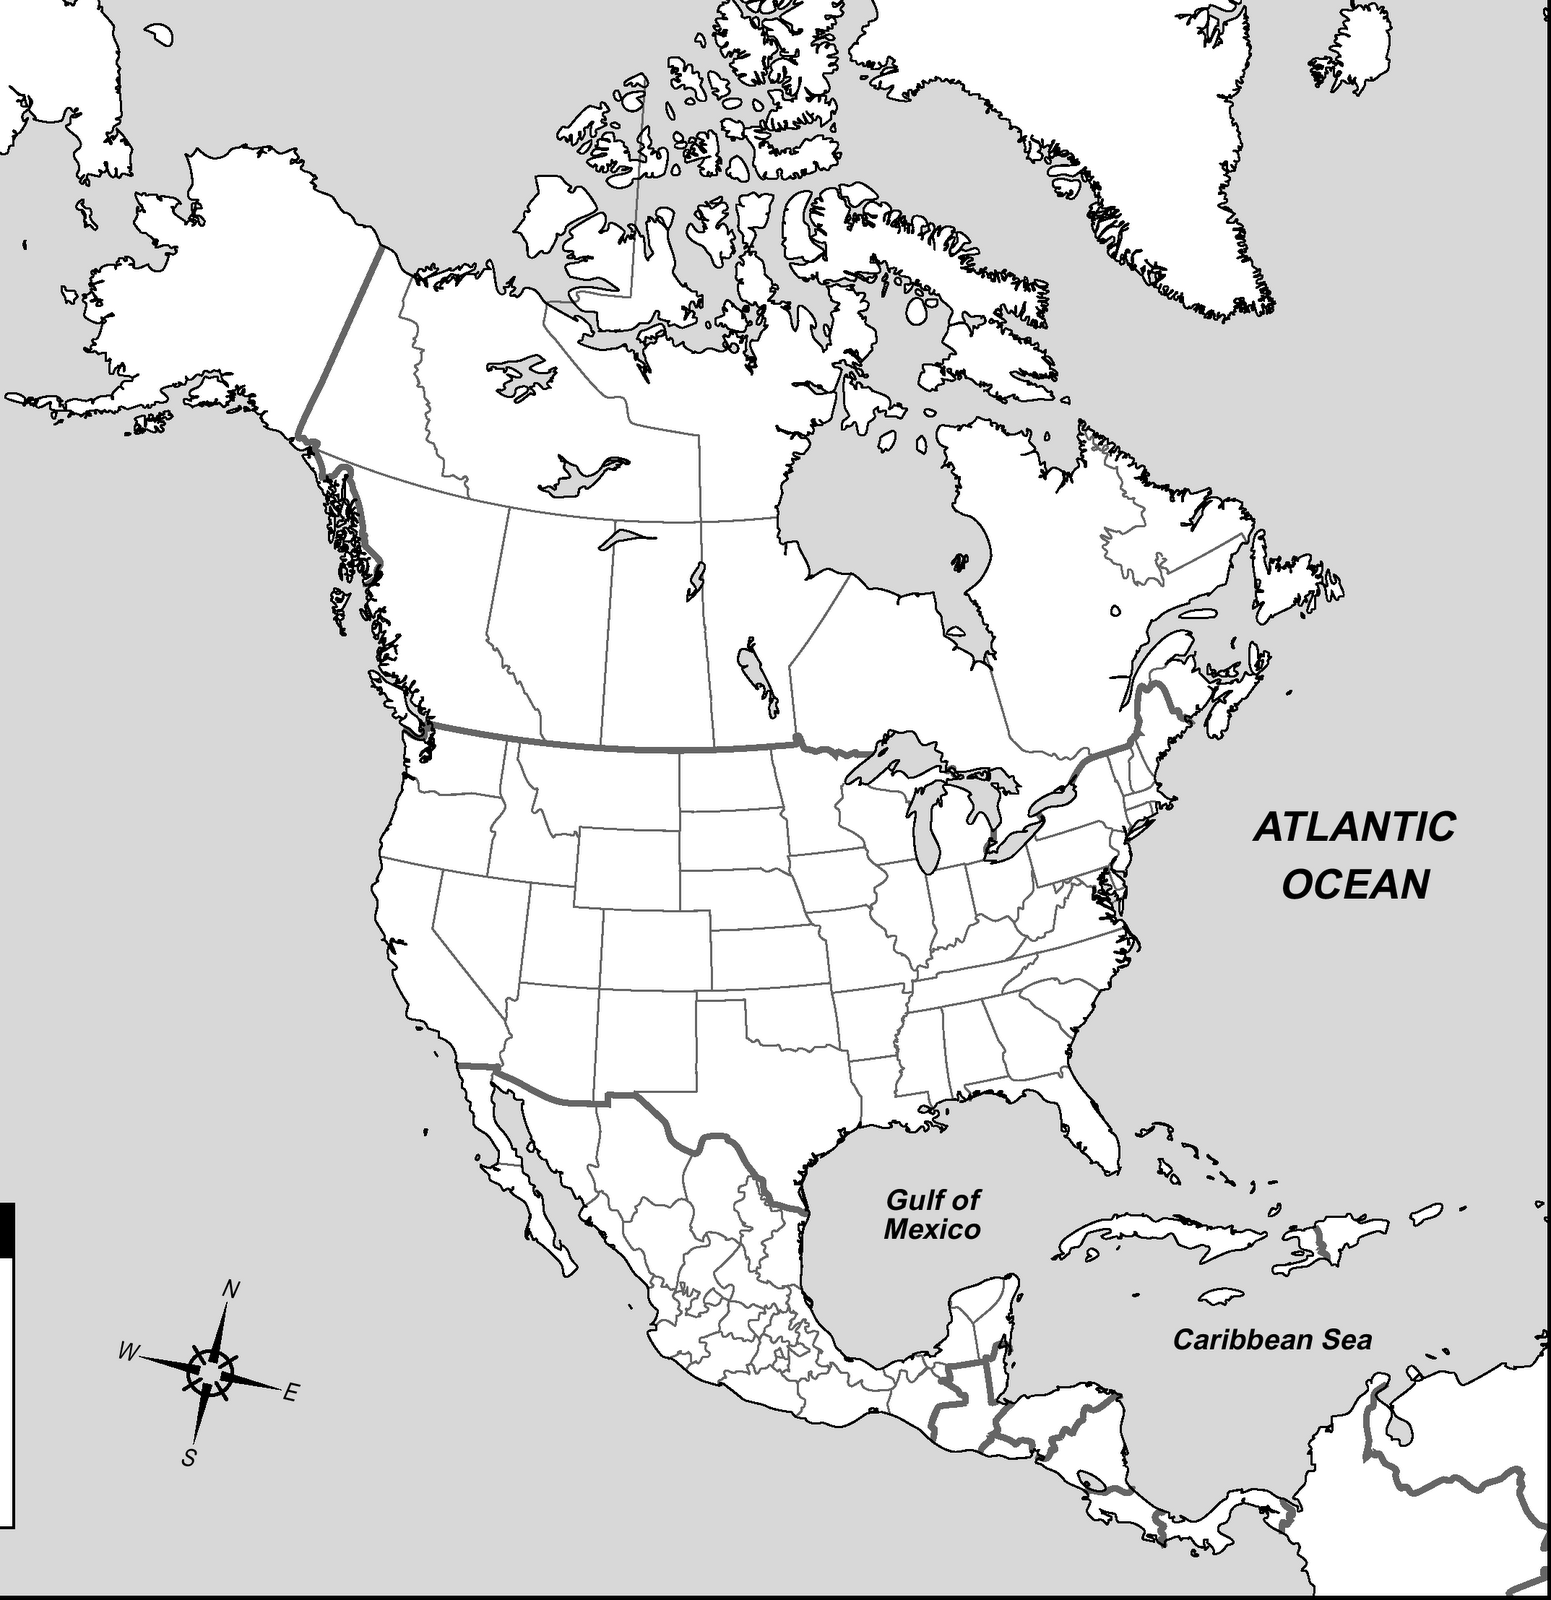 unlabeled blank map of north america pdf Online Maps Blank Map Of North America unlabeled blank map of north america pdf